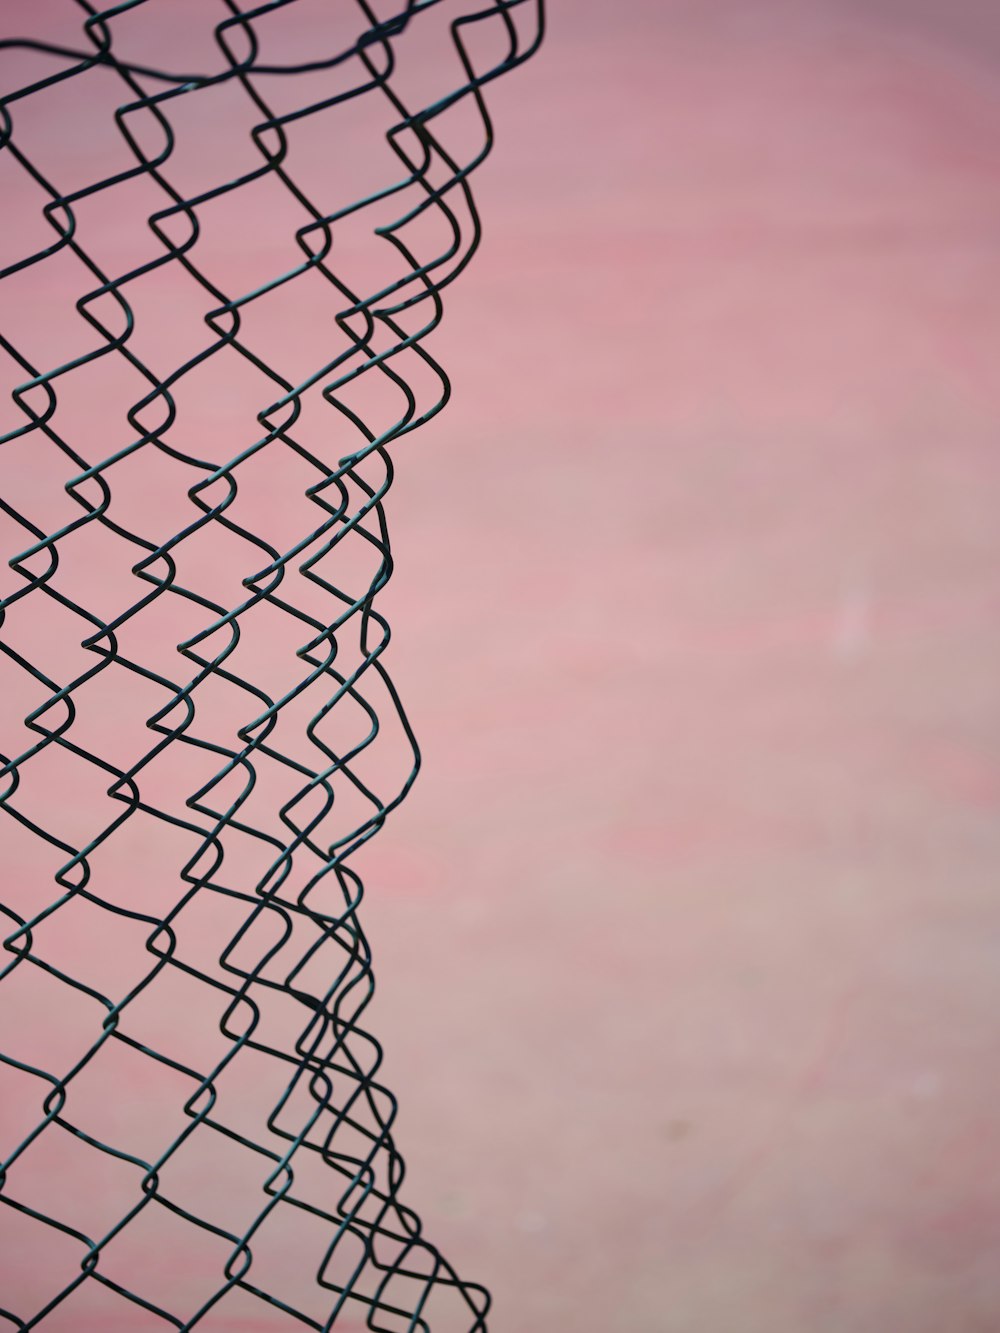 a close up of a wire fence